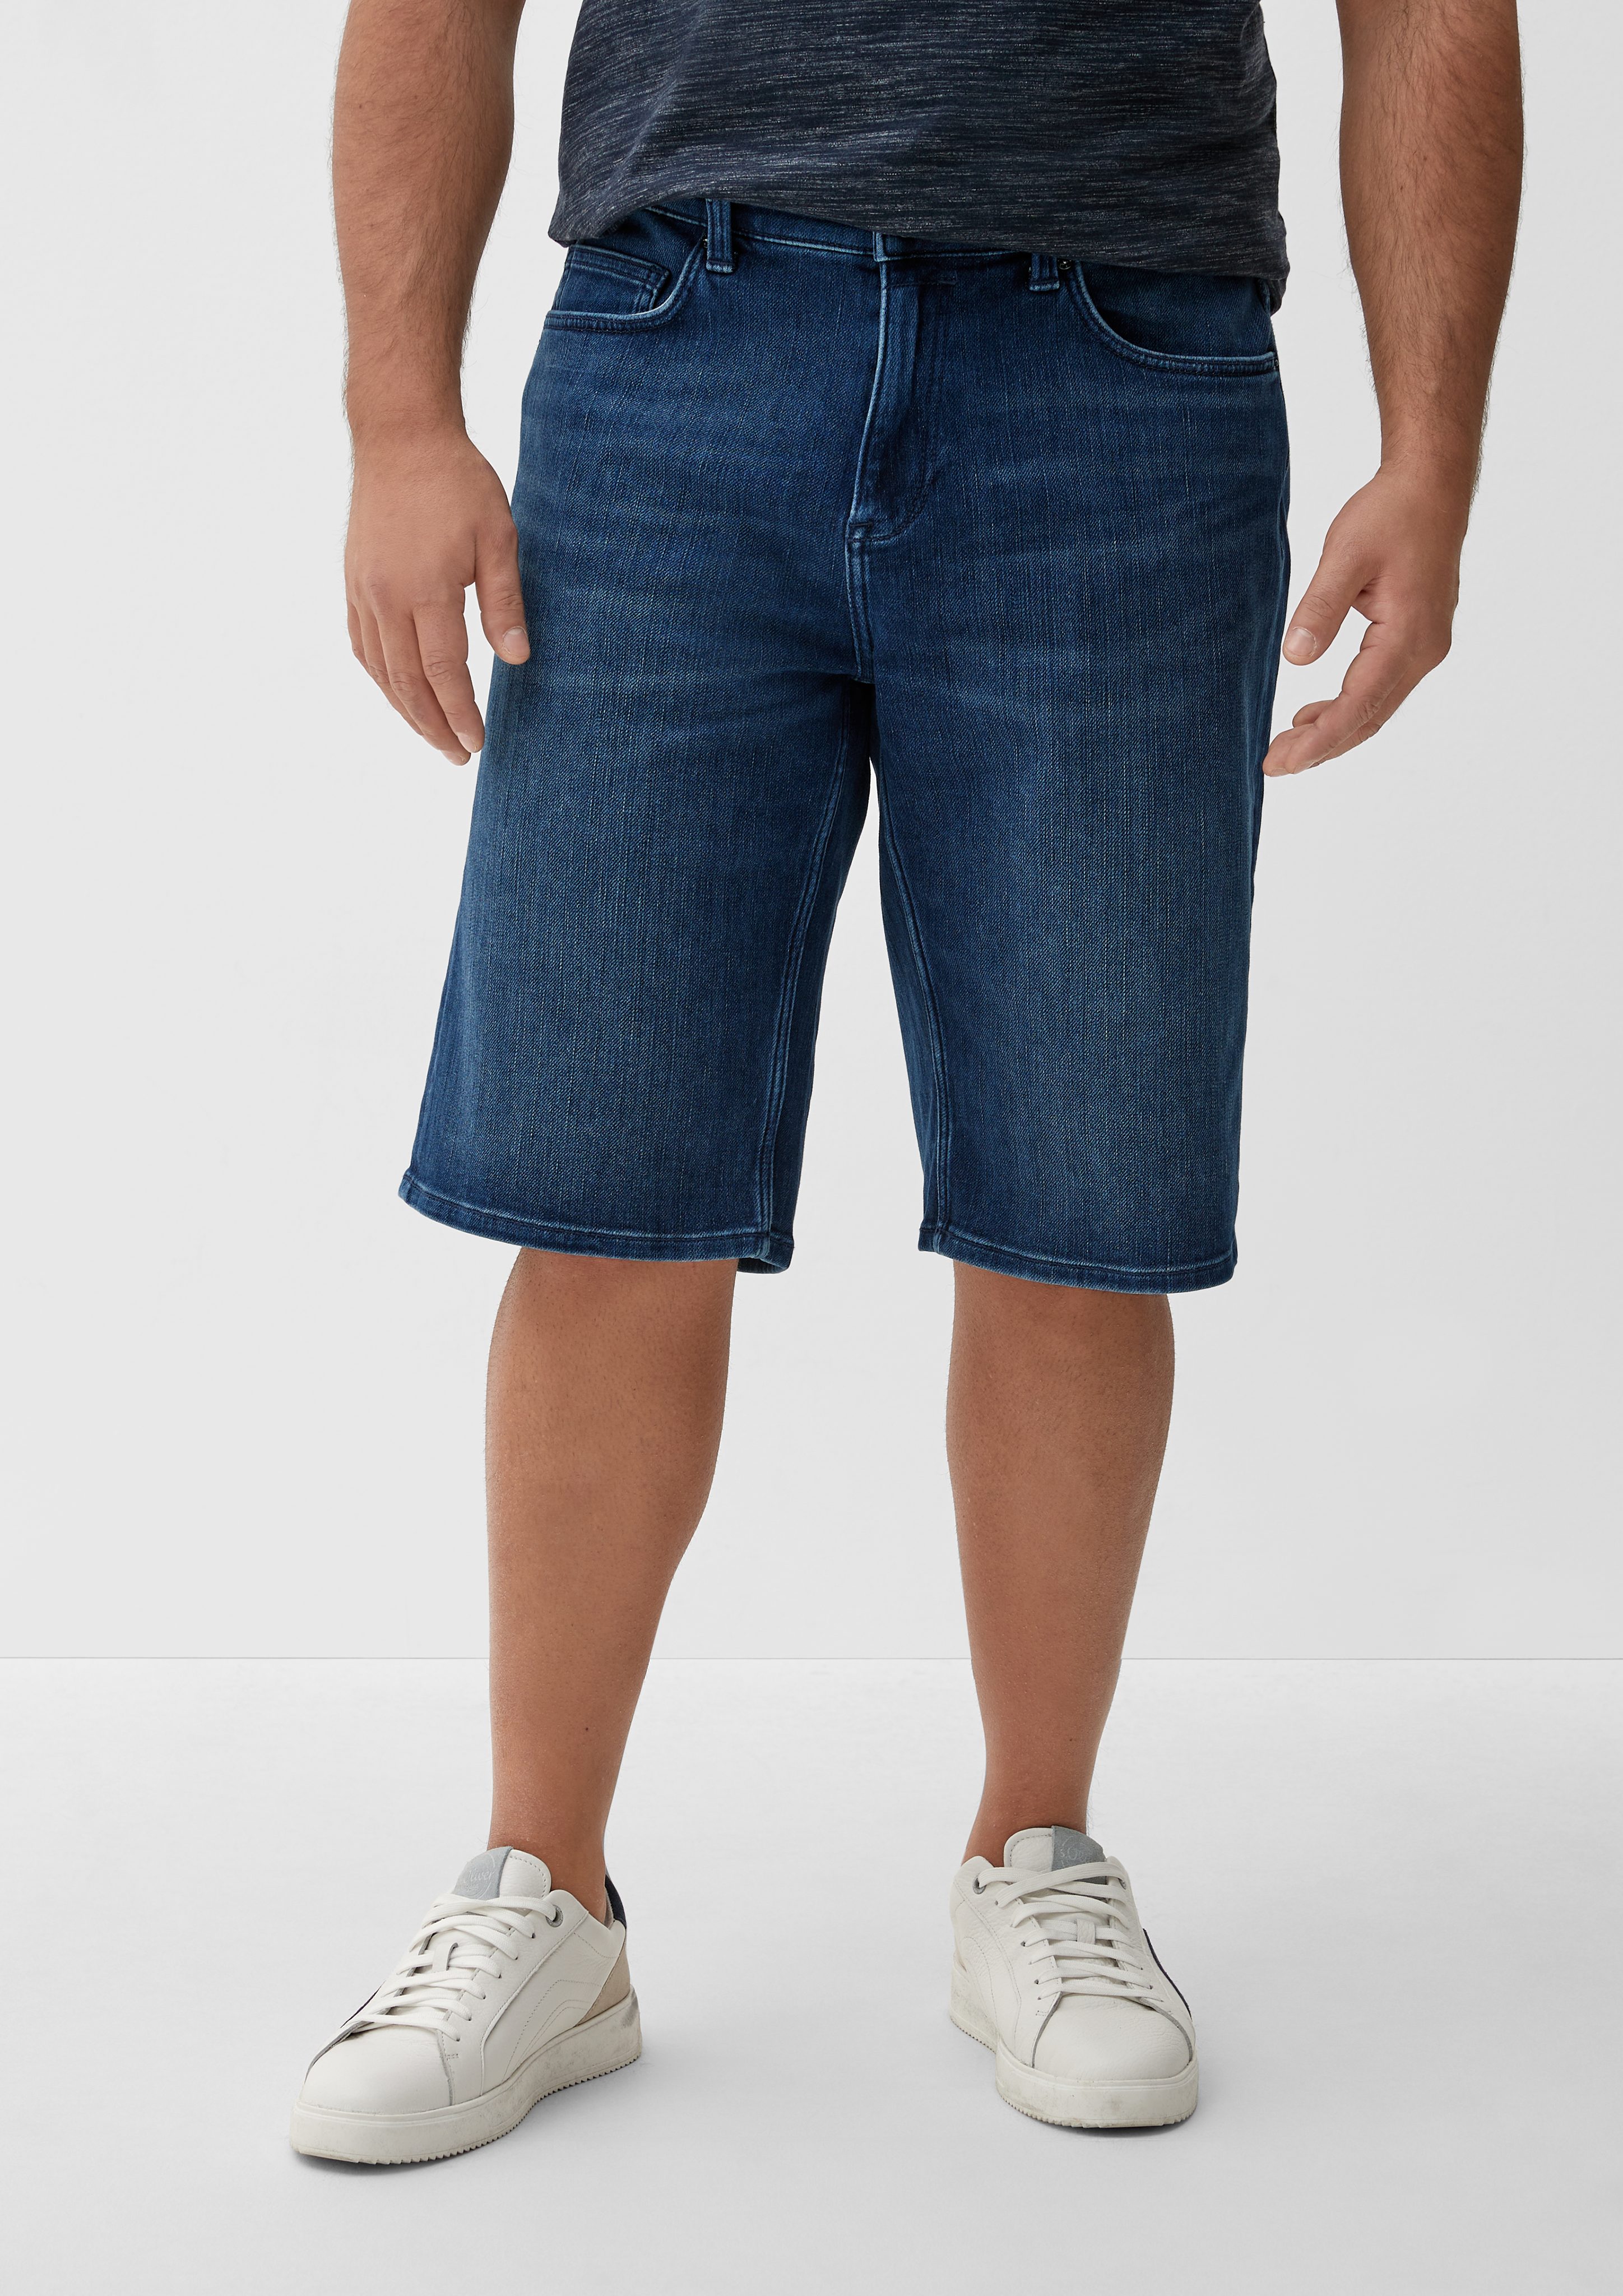 Rise Jeansshorts / Mid Fit / Leg Casby s.Oliver Relaxed Straight / Jeans-Shorts tiefblau